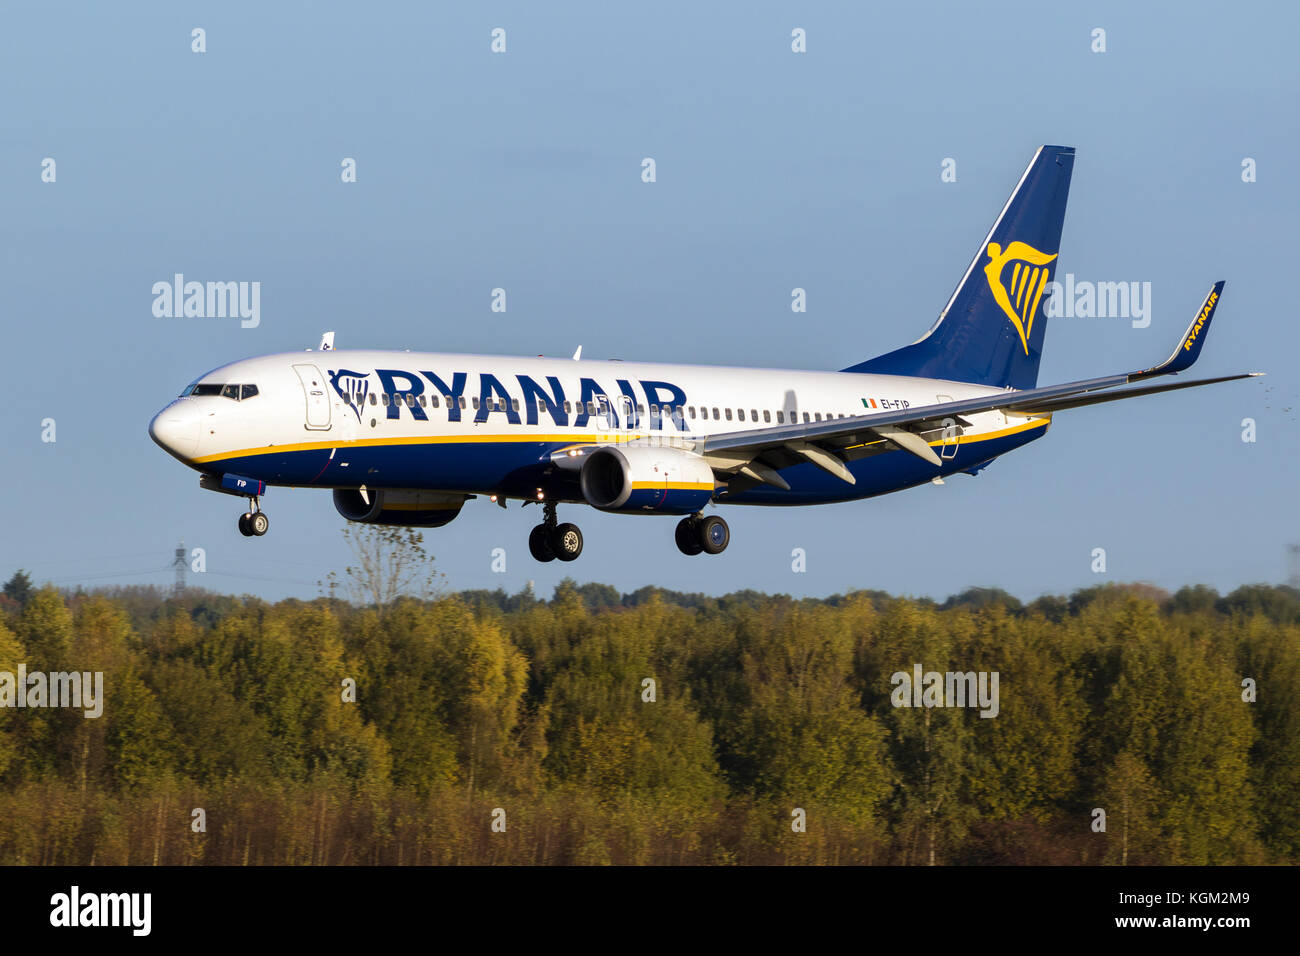 EINDHOVEN, THE NETHERLANDS - OCT 27, 2017: Boeing 737 plane from Ryanair about to land on Eindhoven Airport. Stock Photo